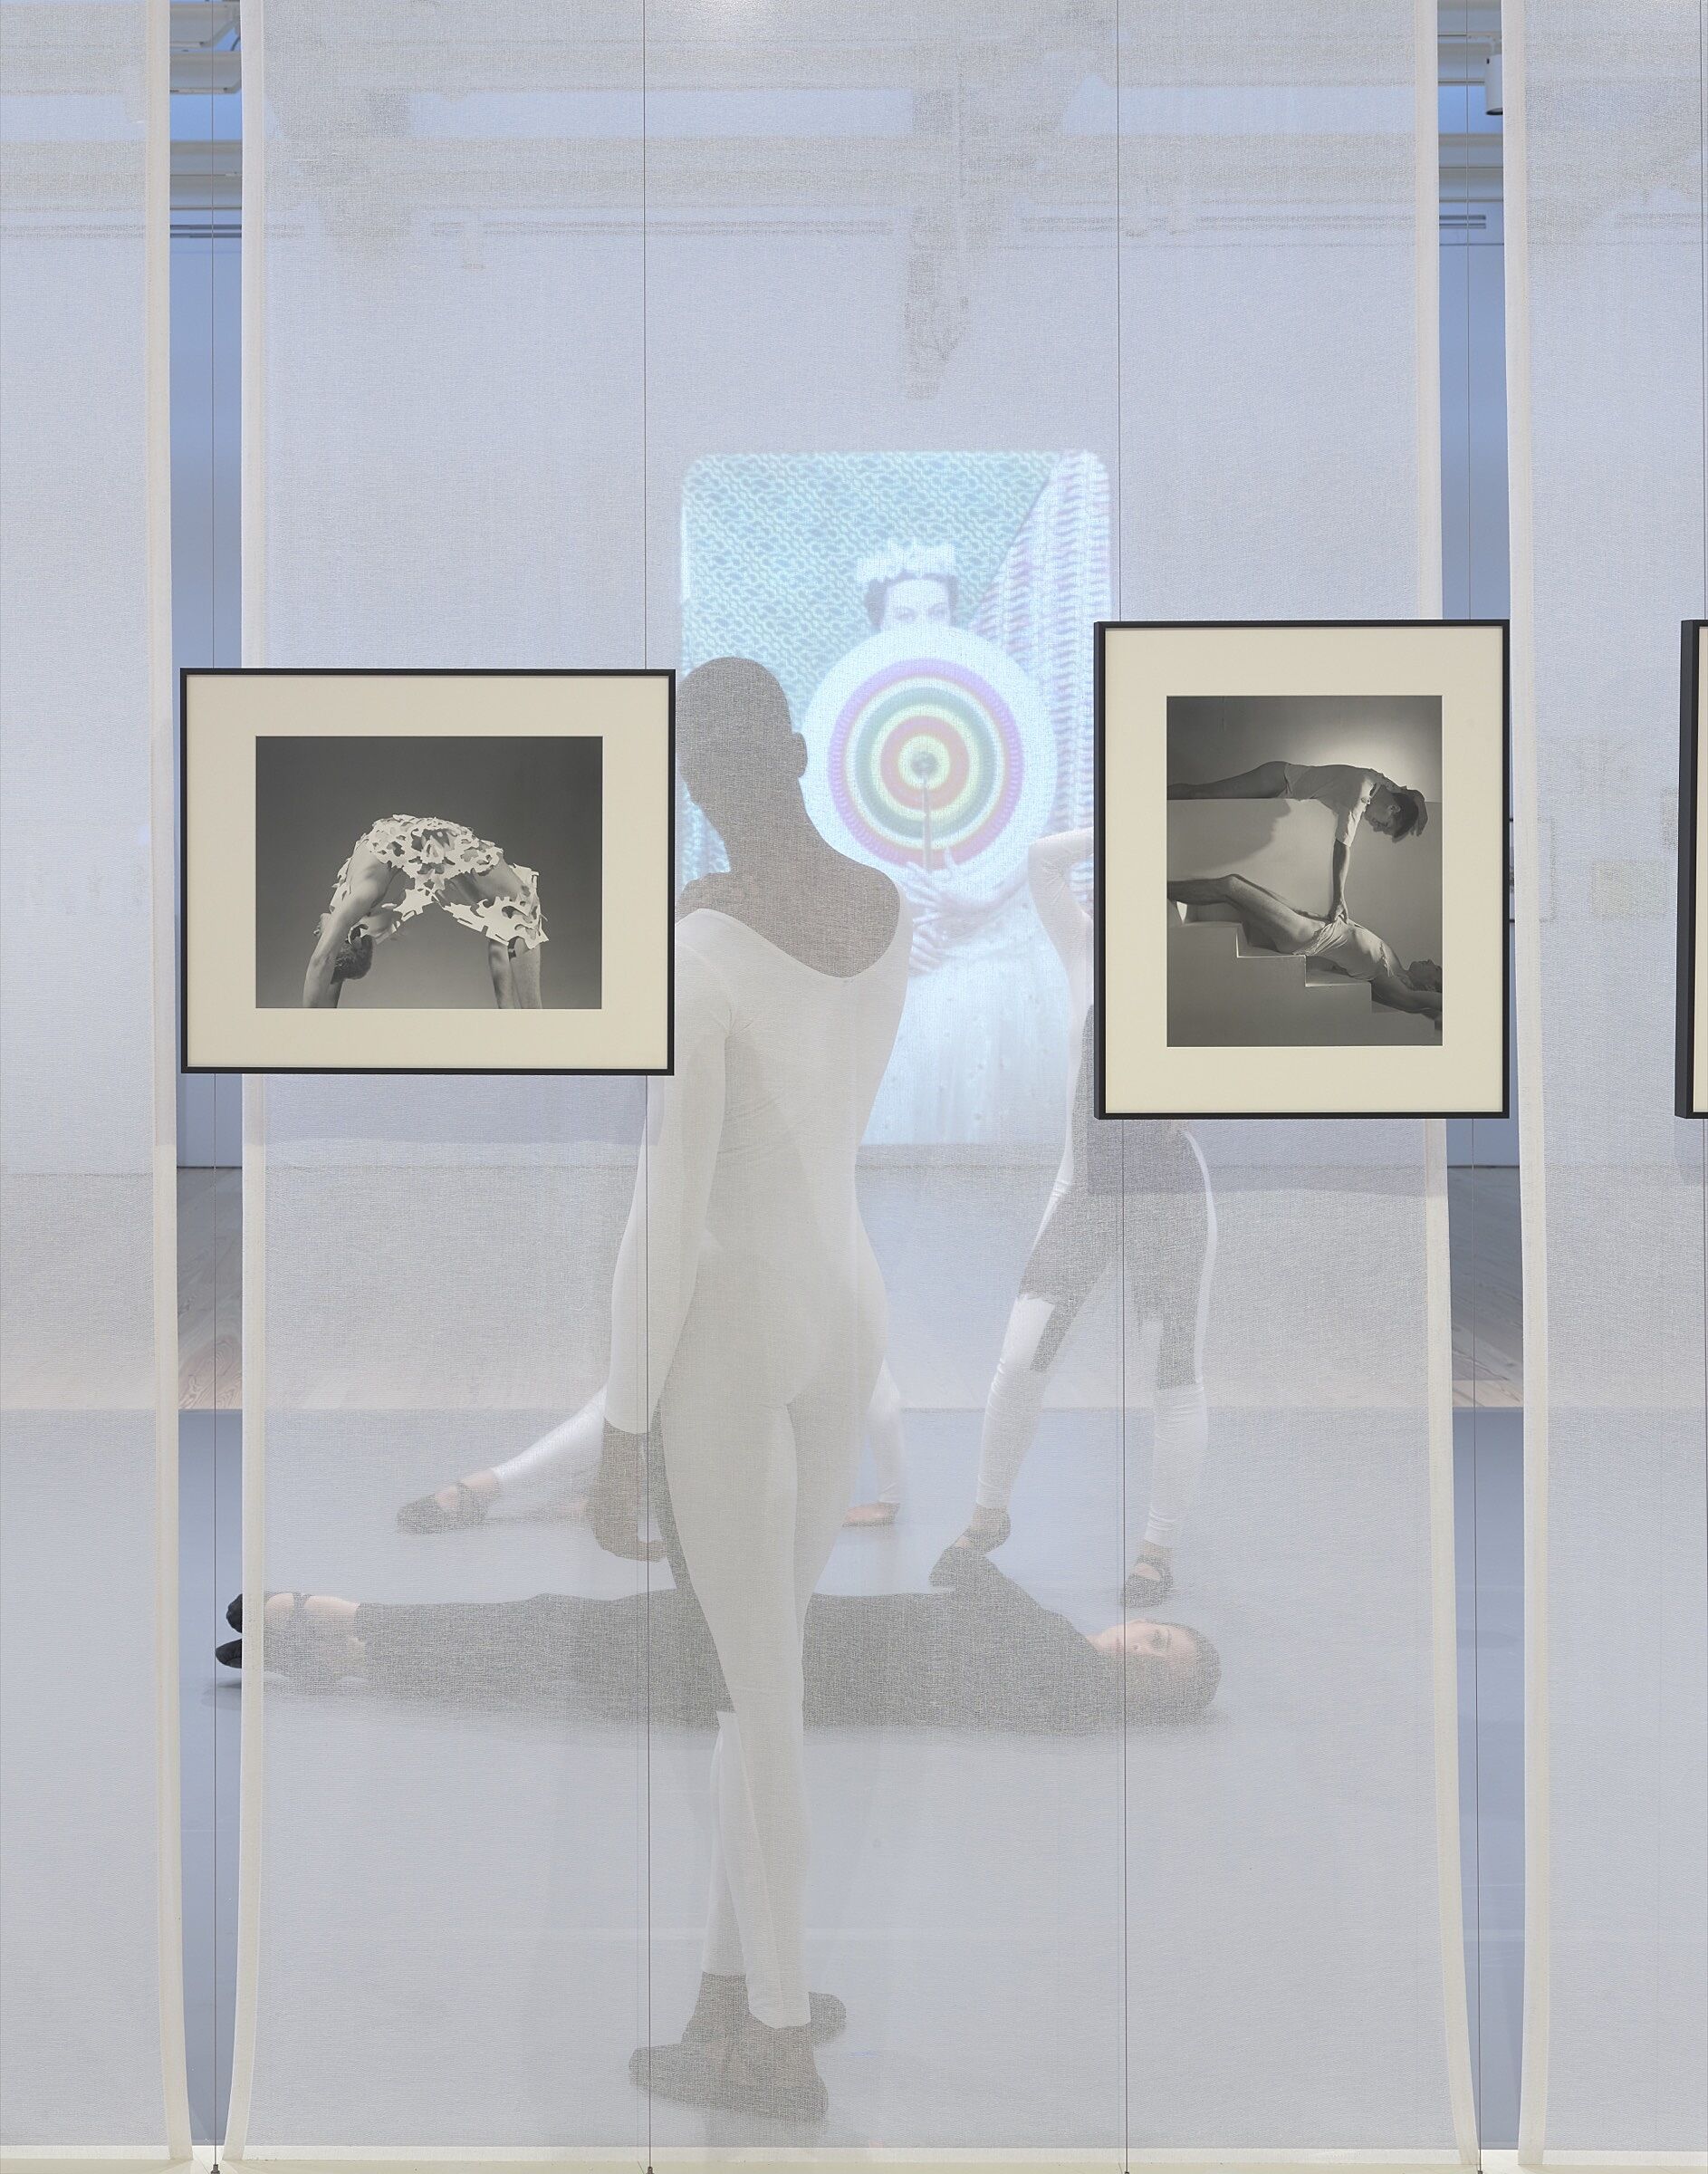 Four dancers perform behind a screen in a gallery space full of photos and video.